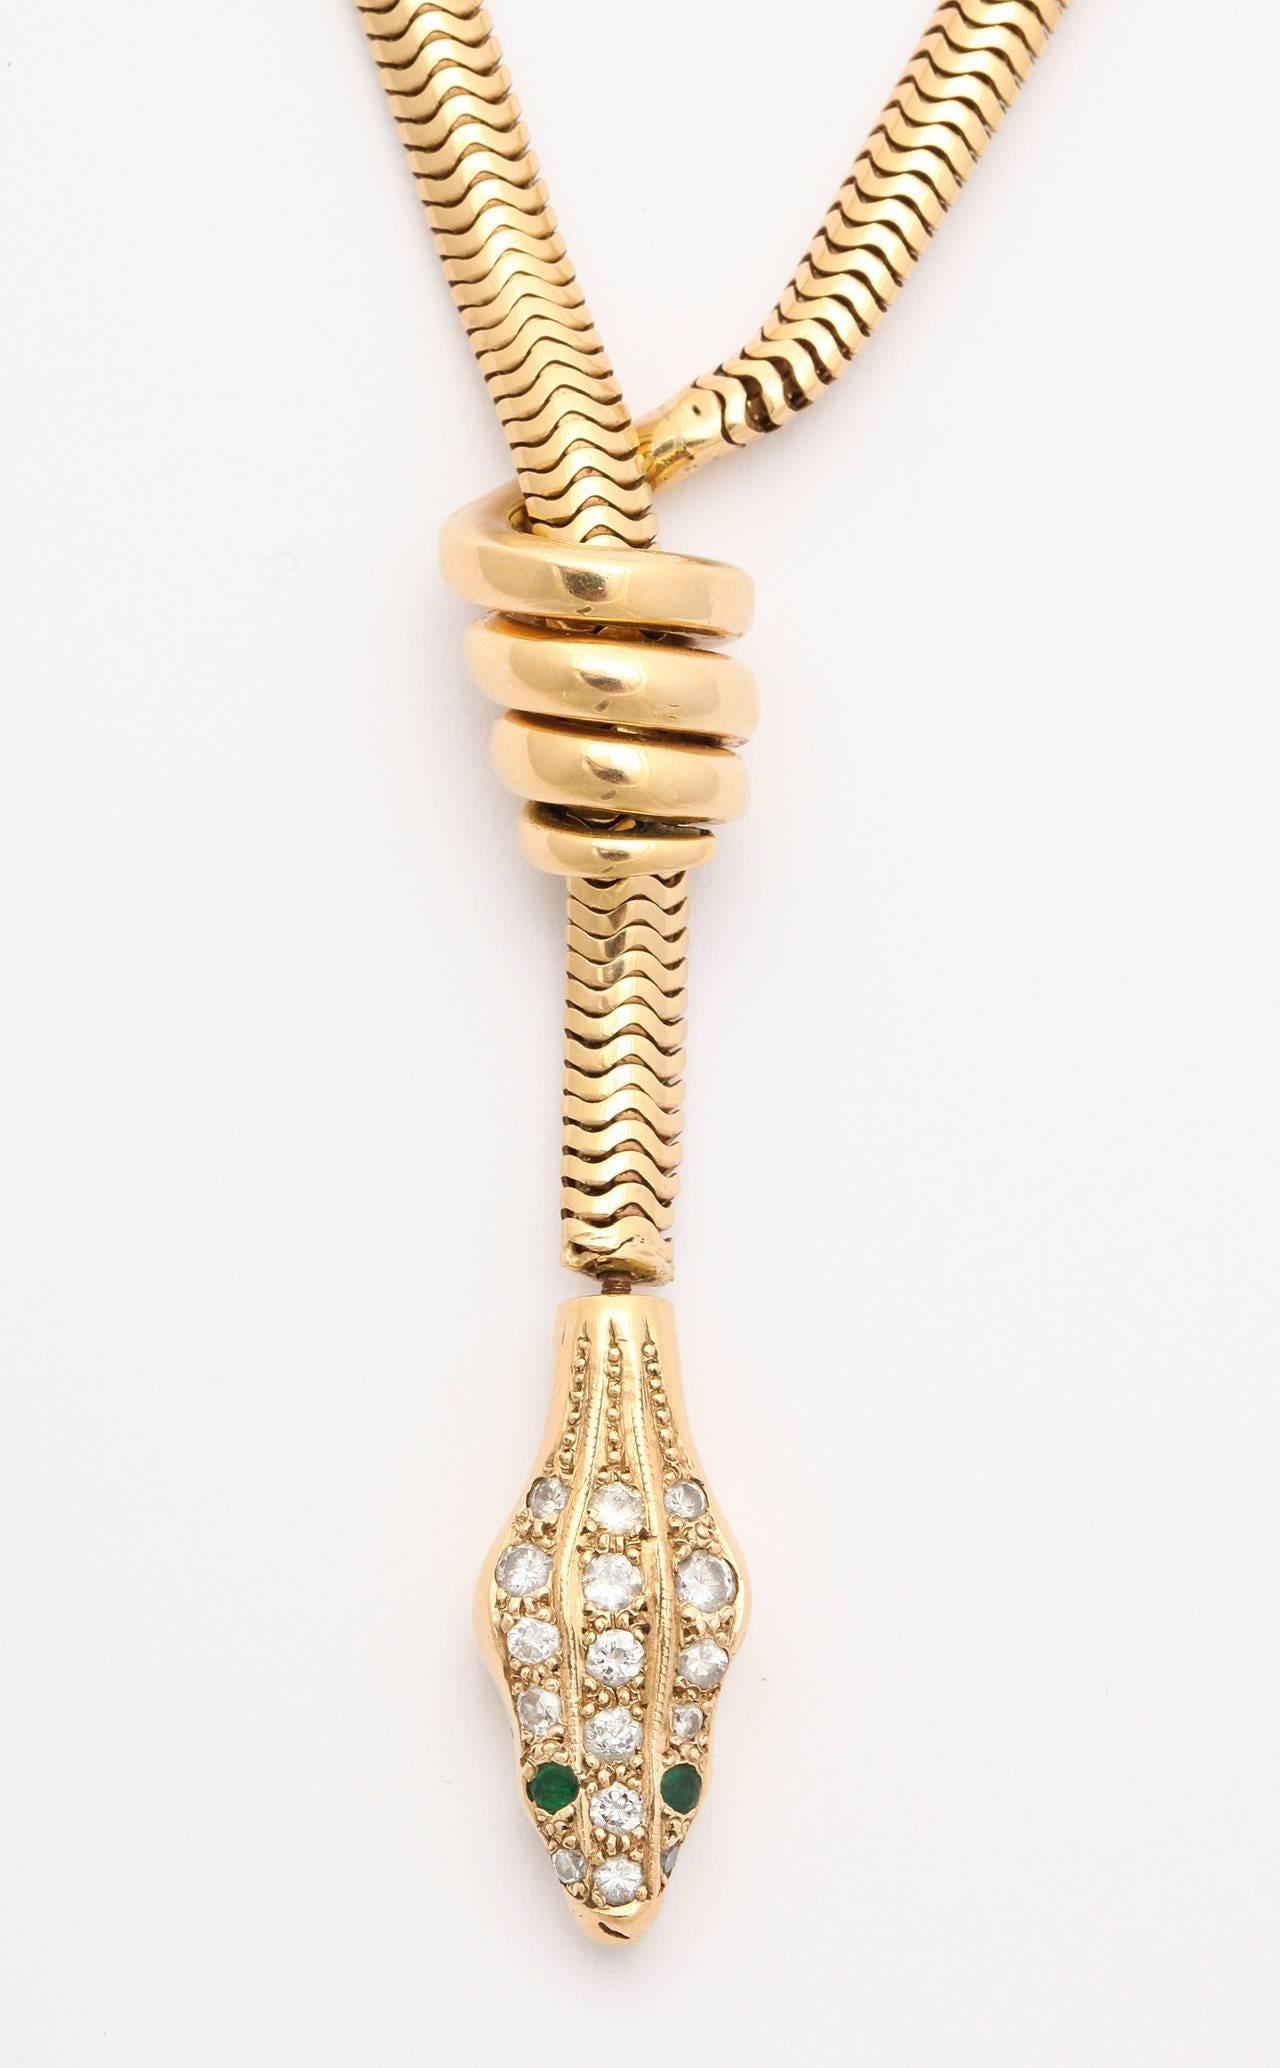 Women's Rare Gold Snake Necklace with Diamond and Emerald Encrusted Head